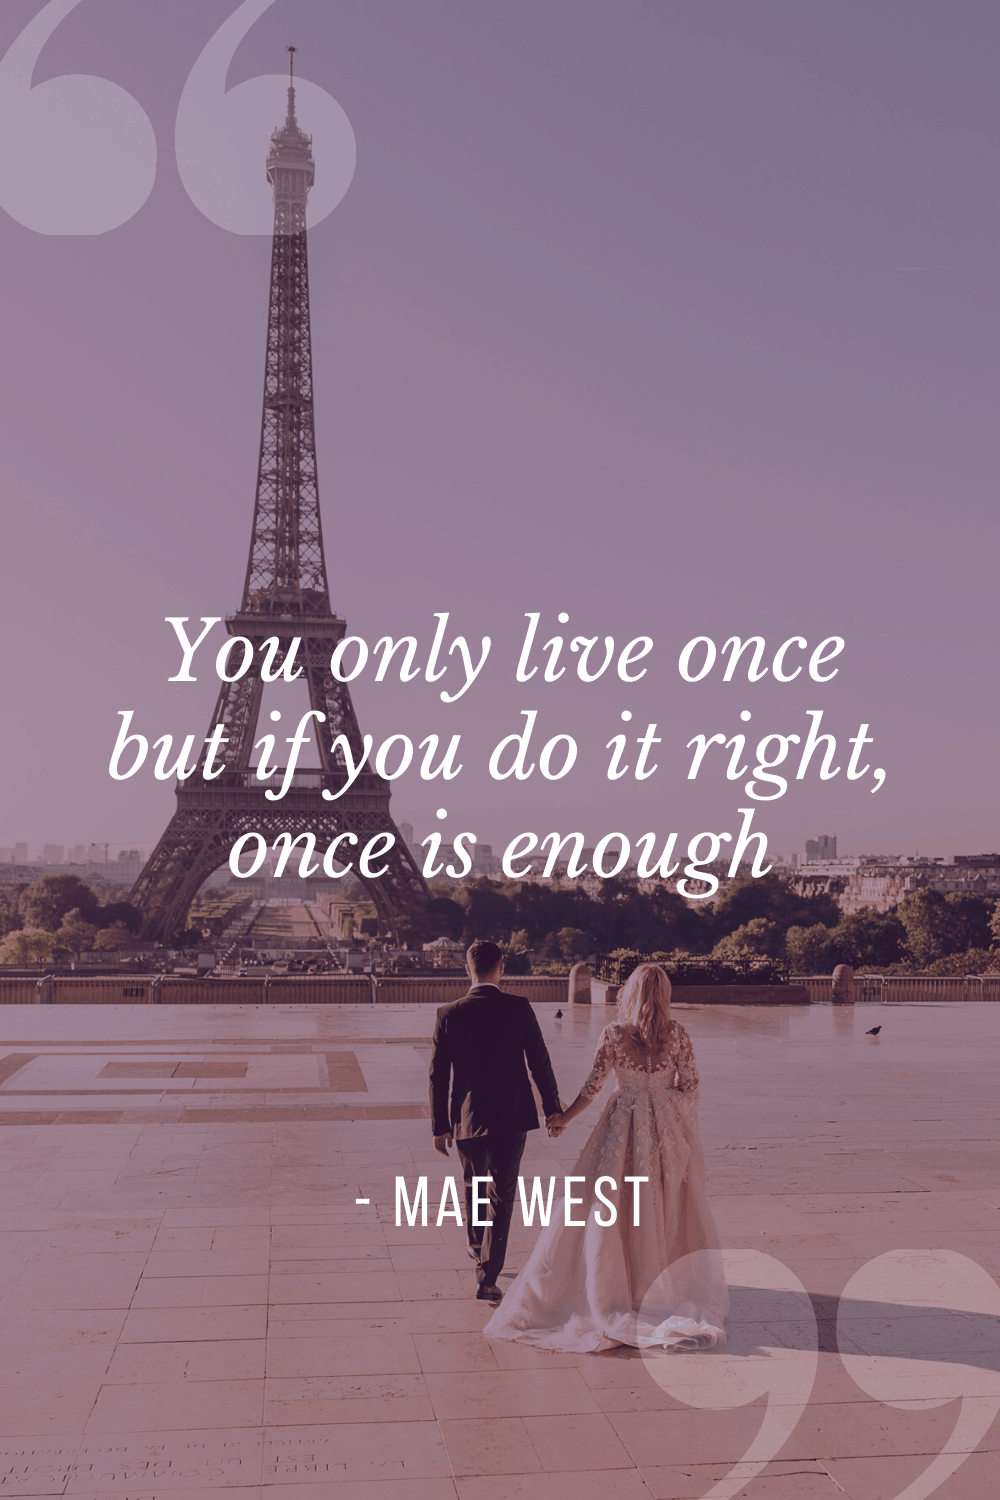 “You only live once but if you do it right, once is enough”, Mae West